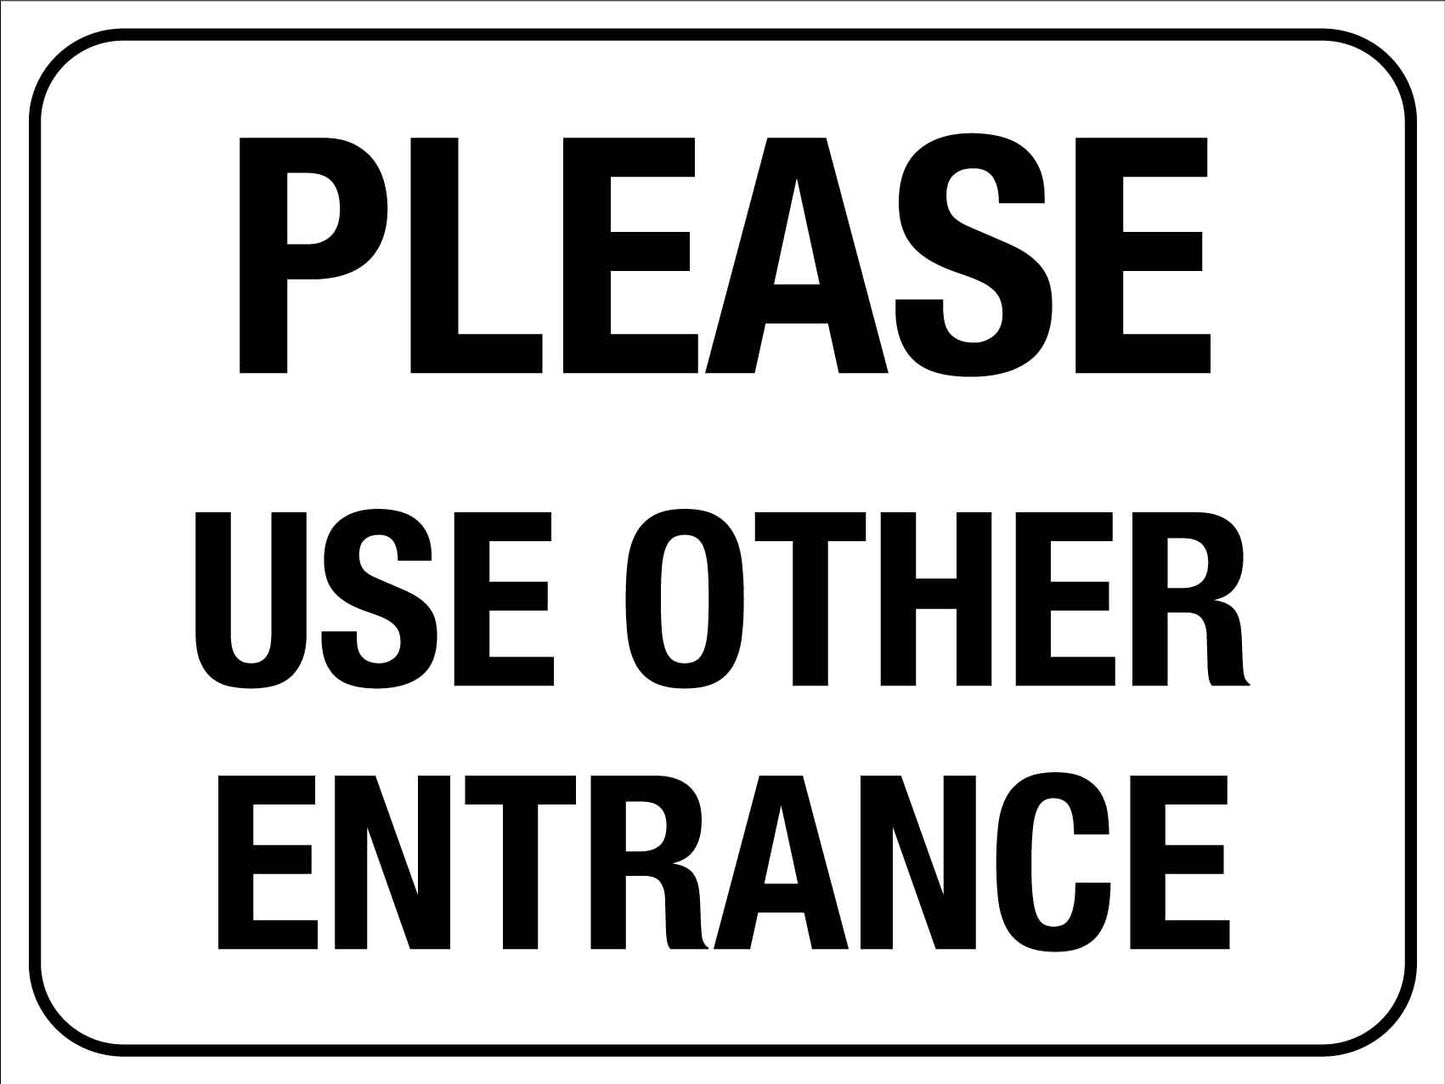 Please Use Other Entrance Sign